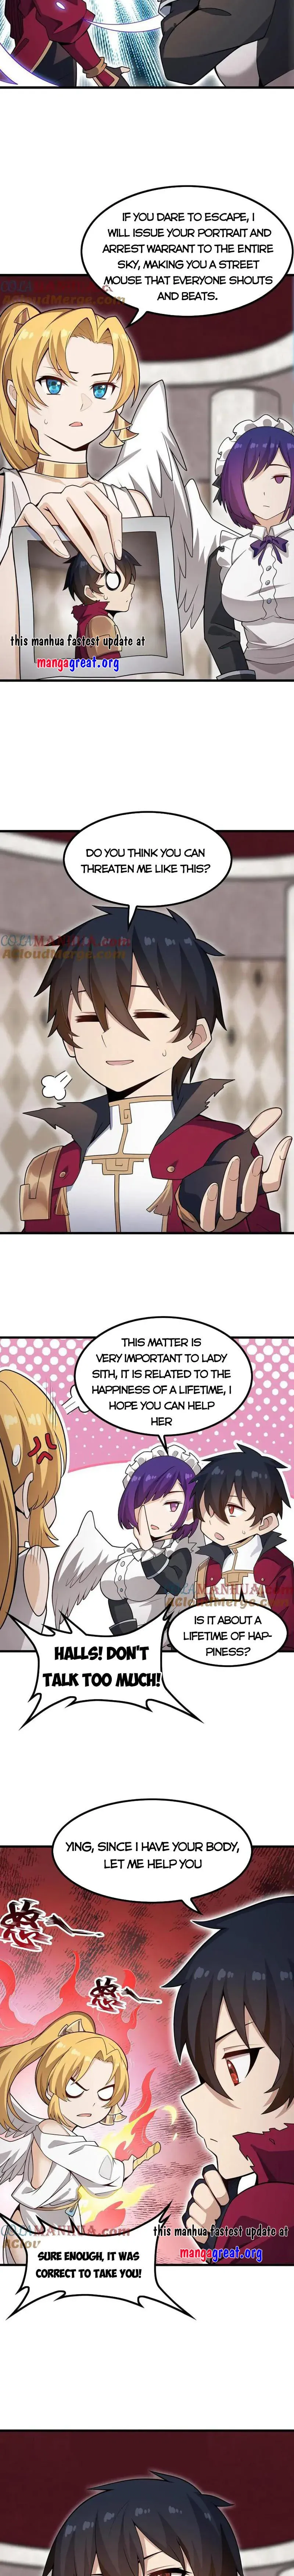 Infinite Apostles and Twelve War Girls Chapter 368 page 6